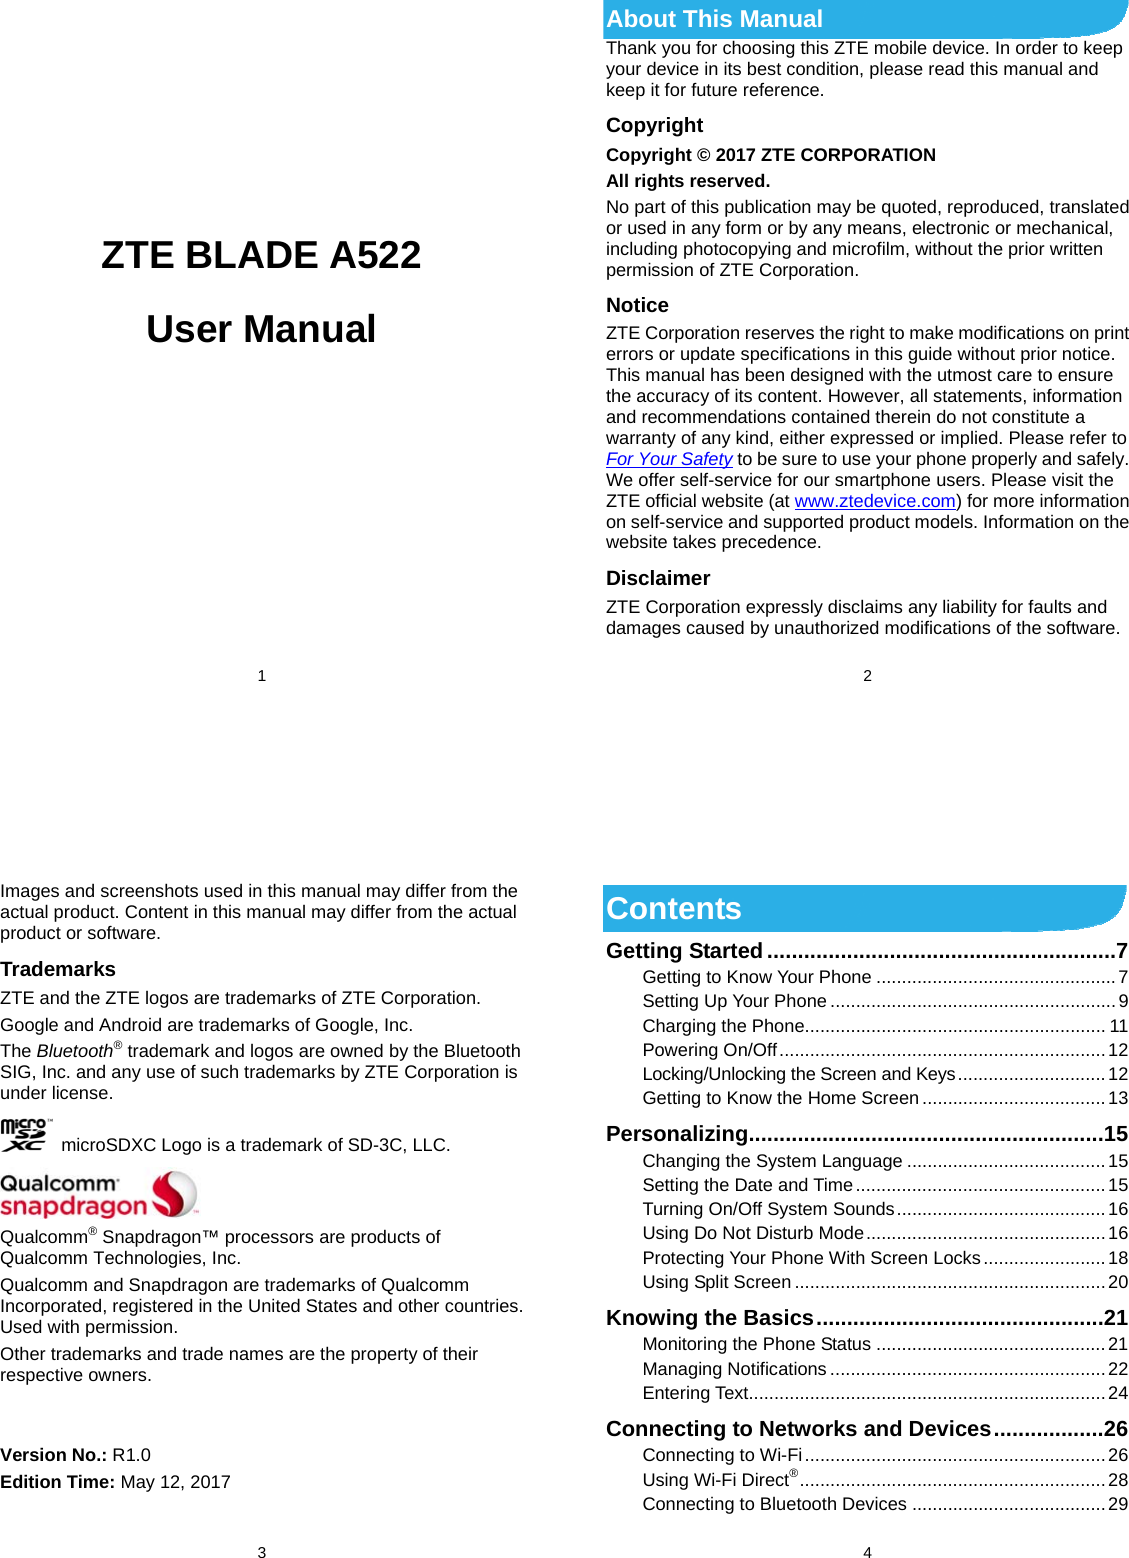  1            ZTE BLADE A522 User Manual     2 About This Manual Thank you for choosing this ZTE mobile device. In order to keep your device in its best condition, please read this manual and keep it for future reference. Copyright Copyright © 2017 ZTE CORPORATION All rights reserved. No part of this publication may be quoted, reproduced, translated or used in any form or by any means, electronic or mechanical, including photocopying and microfilm, without the prior written permission of ZTE Corporation. Notice ZTE Corporation reserves the right to make modifications on print errors or update specifications in this guide without prior notice. This manual has been designed with the utmost care to ensure the accuracy of its content. However, all statements, information and recommendations contained therein do not constitute a warranty of any kind, either expressed or implied. Please refer to For Your Safety to be sure to use your phone properly and safely. We offer self-service for our smartphone users. Please visit the ZTE official website (at www.ztedevice.com) for more information on self-service and supported product models. Information on the website takes precedence. Disclaimer ZTE Corporation expressly disclaims any liability for faults and damages caused by unauthorized modifications of the software.  3 Images and screenshots used in this manual may differ from the actual product. Content in this manual may differ from the actual product or software. Trademarks ZTE and the ZTE logos are trademarks of ZTE Corporation. Google and Android are trademarks of Google, Inc.   The Bluetooth® trademark and logos are owned by the Bluetooth SIG, Inc. and any use of such trademarks by ZTE Corporation is under license.     microSDXC Logo is a trademark of SD-3C, LLC.  Qualcomm® Snapdragon™ processors are products of Qualcomm Technologies, Inc.   Qualcomm and Snapdragon are trademarks of Qualcomm Incorporated, registered in the United States and other countries. Used with permission. Other trademarks and trade names are the property of their respective owners.   Version No.: R1.0 Edition Time: May 12, 2017  4 Contents Getting Started ......................................................... 7Getting to Know Your Phone ............................................... 7Setting Up Your Phone ........................................................ 9Charging the Phone........................................................... 11Powering On/Off ................................................................ 12Locking/Unlocking the Screen and Keys ............................. 12Getting to Know the Home Screen .................................... 13Personalizing .......................................................... 15Changing the System Language ....................................... 15Setting  the  Date  and  Time ................................................. 15Turning On/Off System Sounds ......................................... 16Using Do Not Disturb Mode ............................................... 16Protecting Your Phone With Screen Locks ........................ 18Using Split Screen ............................................................. 20Knowing the Basics ............................................... 21Monitoring the Phone Status ............................................. 21Managing Notifications ...................................................... 22Entering Text...................................................................... 24Connecting to Networks and Devices .................. 26Connecting to Wi-Fi ........................................................... 26Using Wi-Fi Direct® ............................................................  28Connecting to Bluetooth Devices ...................................... 29